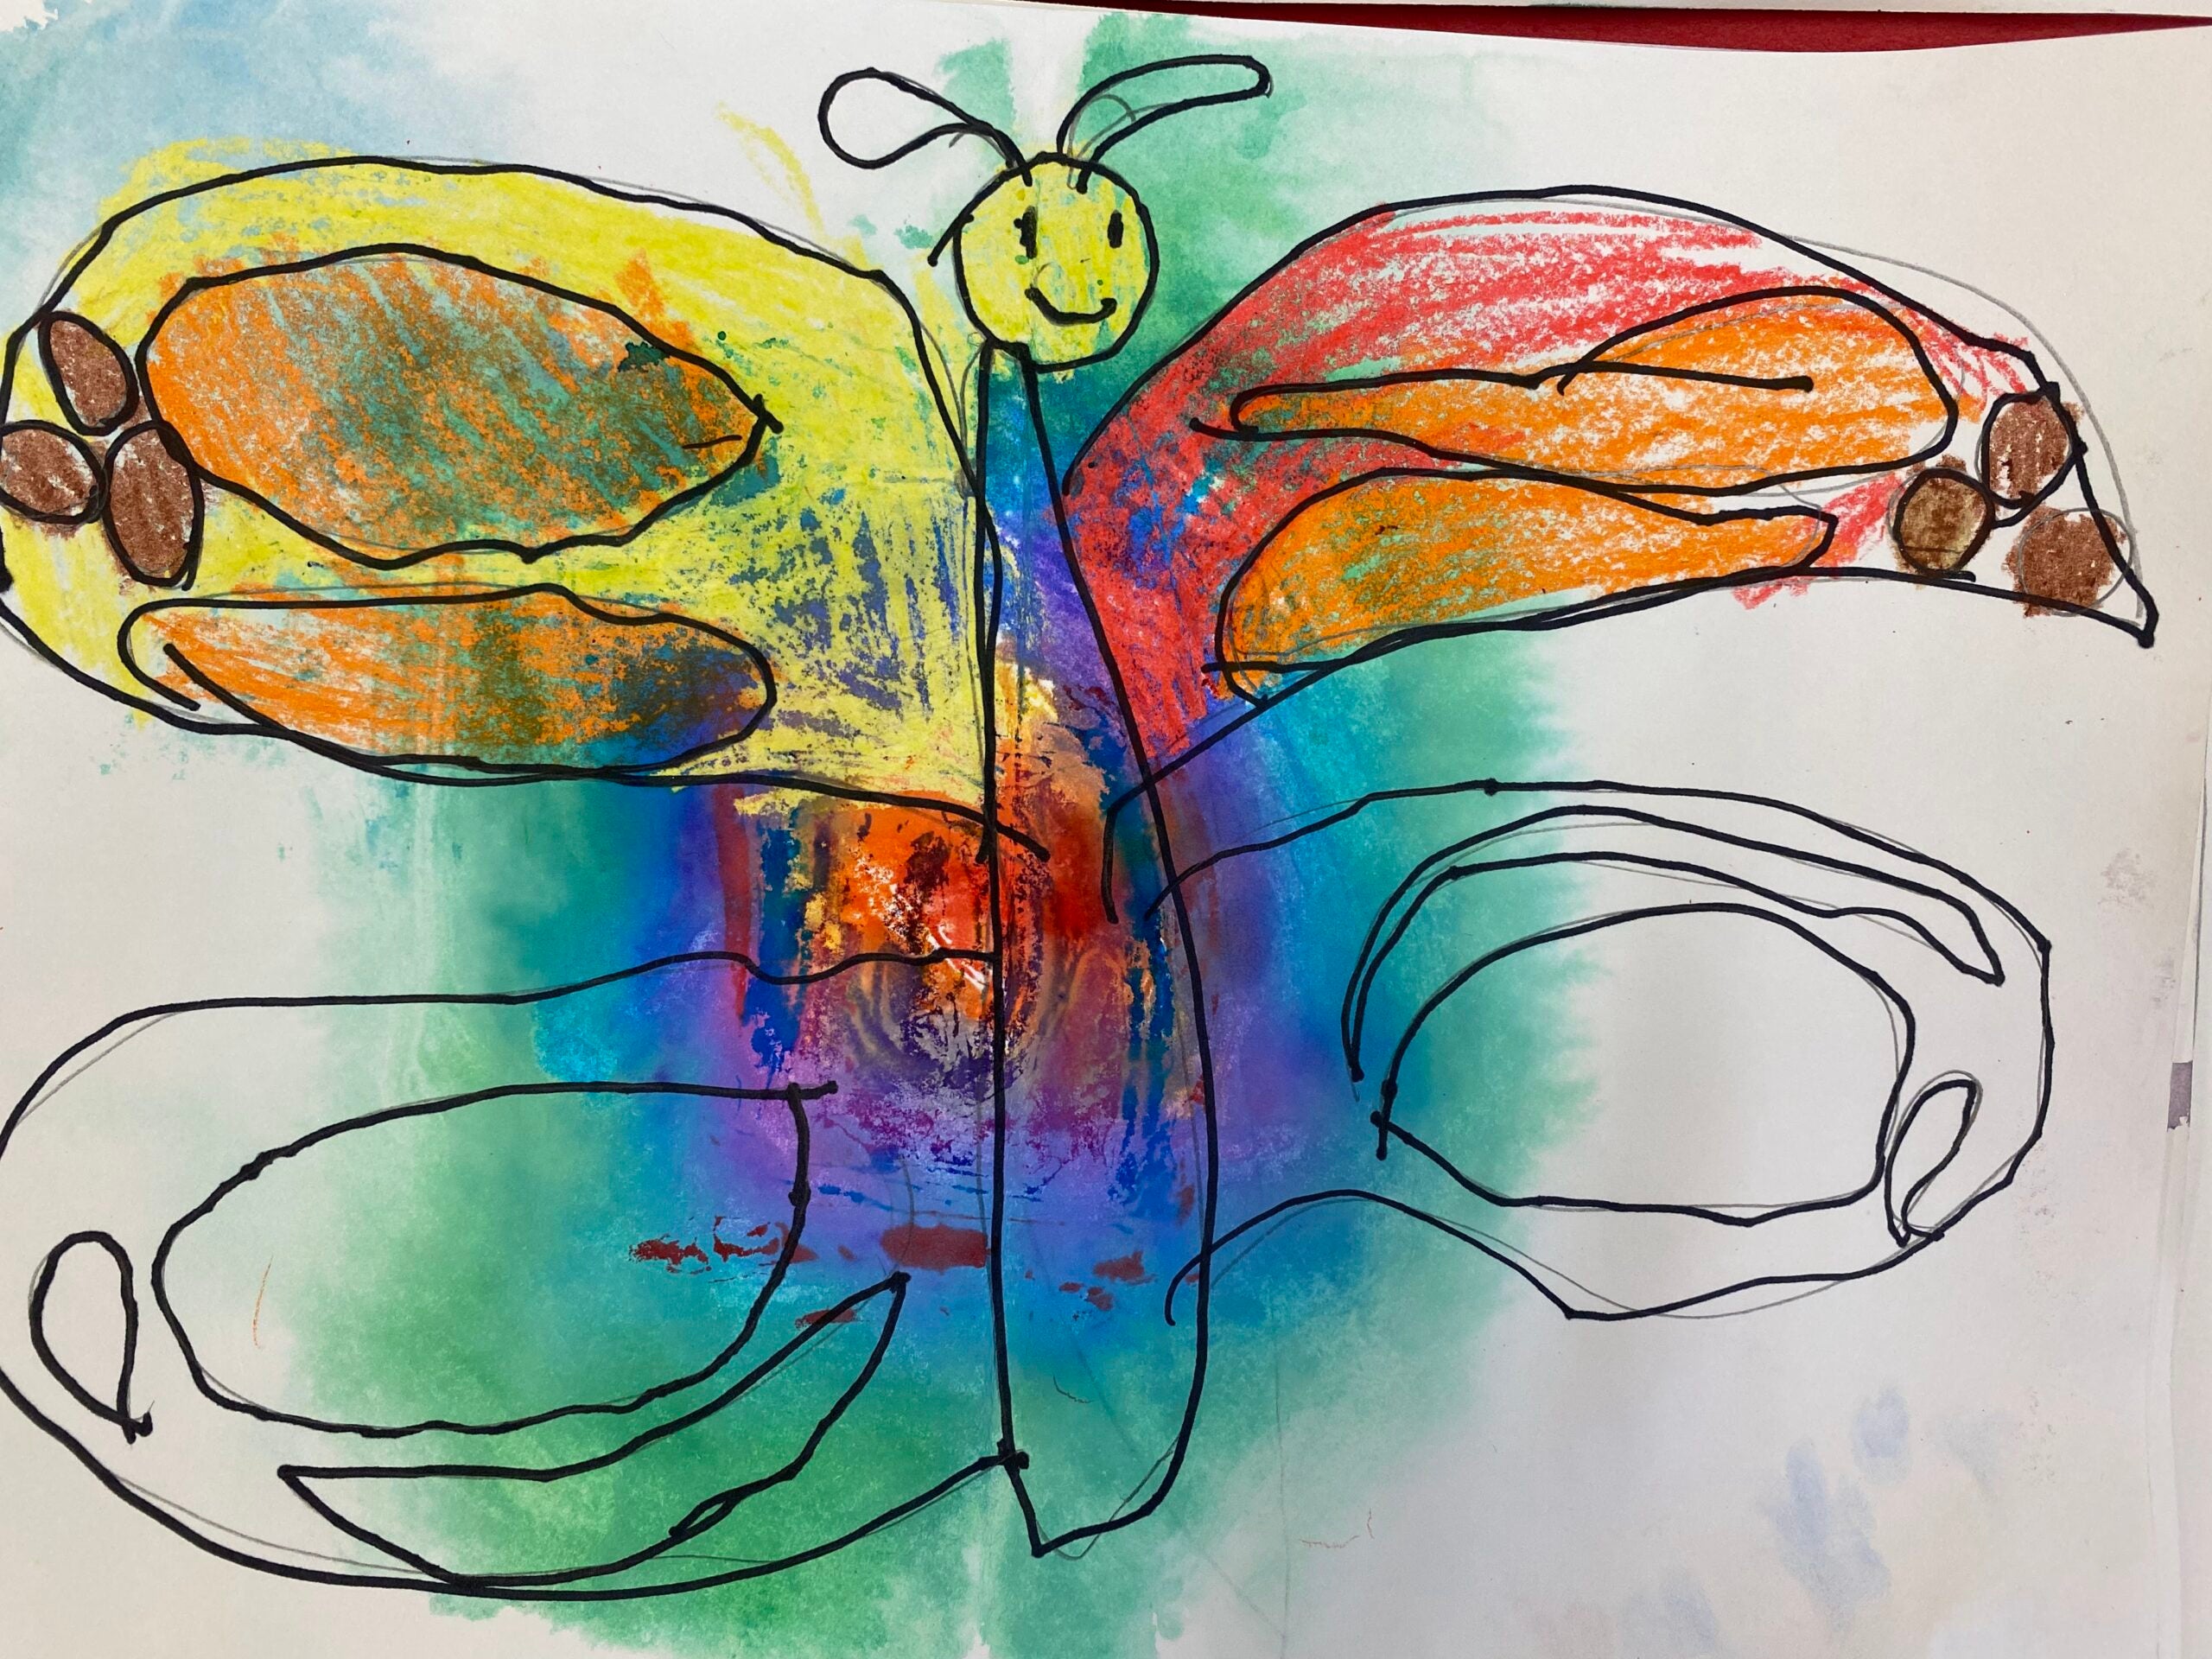 Student artwork depicting a drawing of a butterfly.